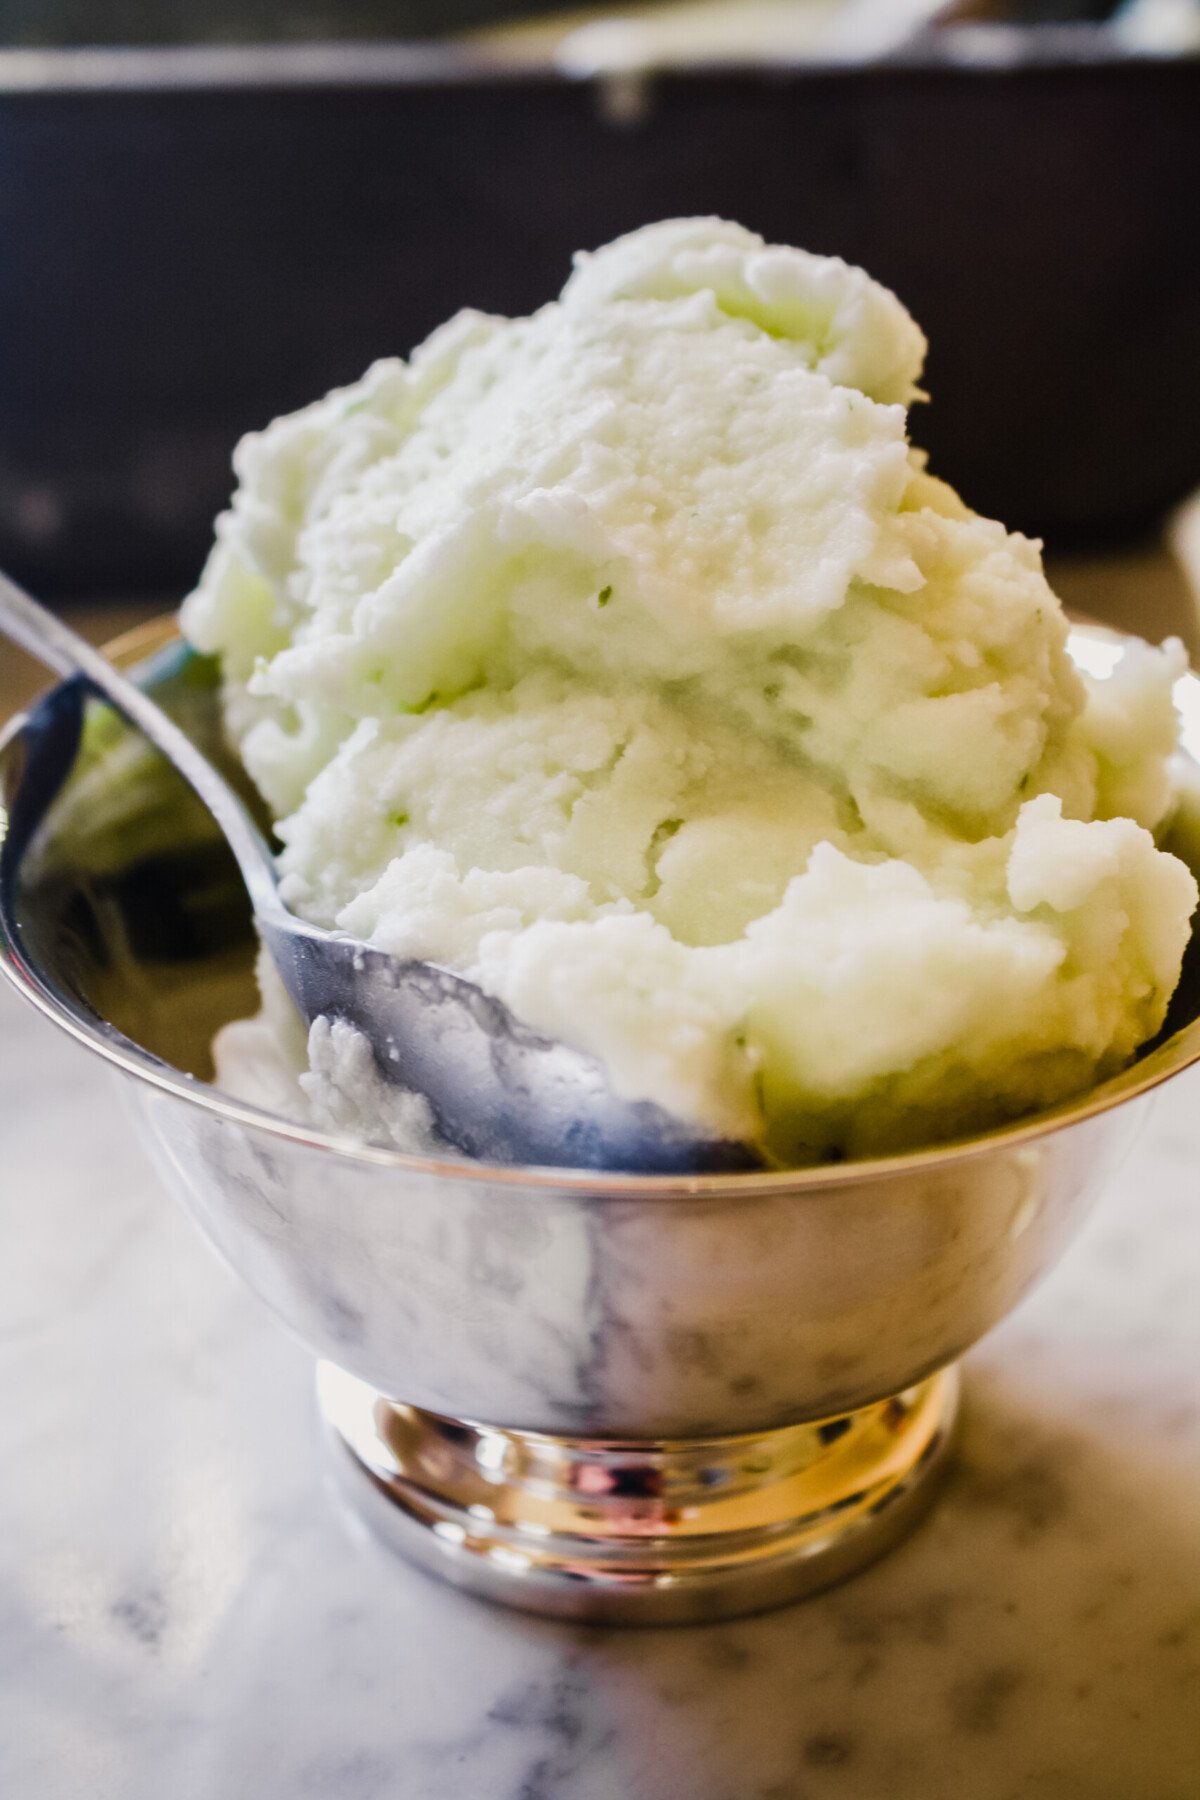 Photograph of sorbet piled high in a silver bowl.